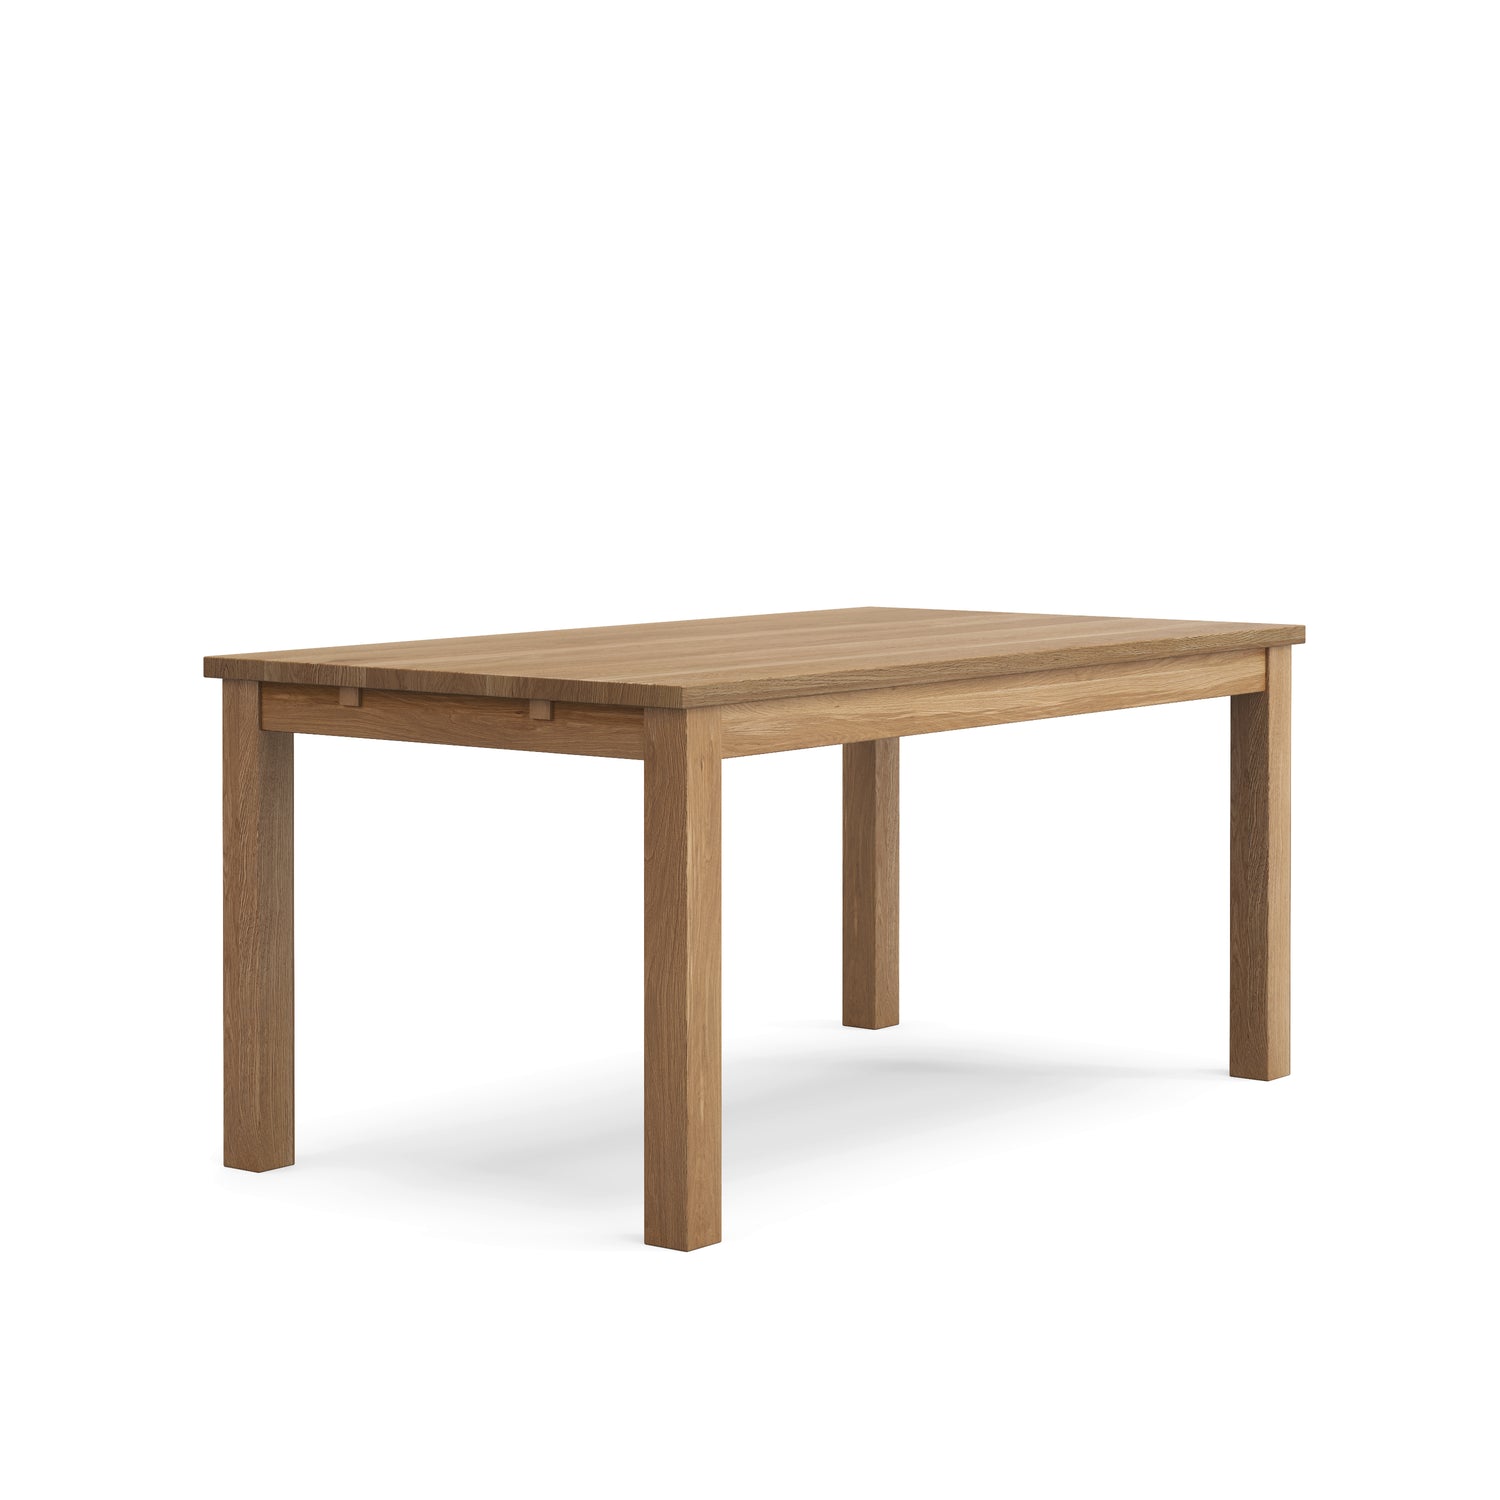 Classic solid wood dinning table